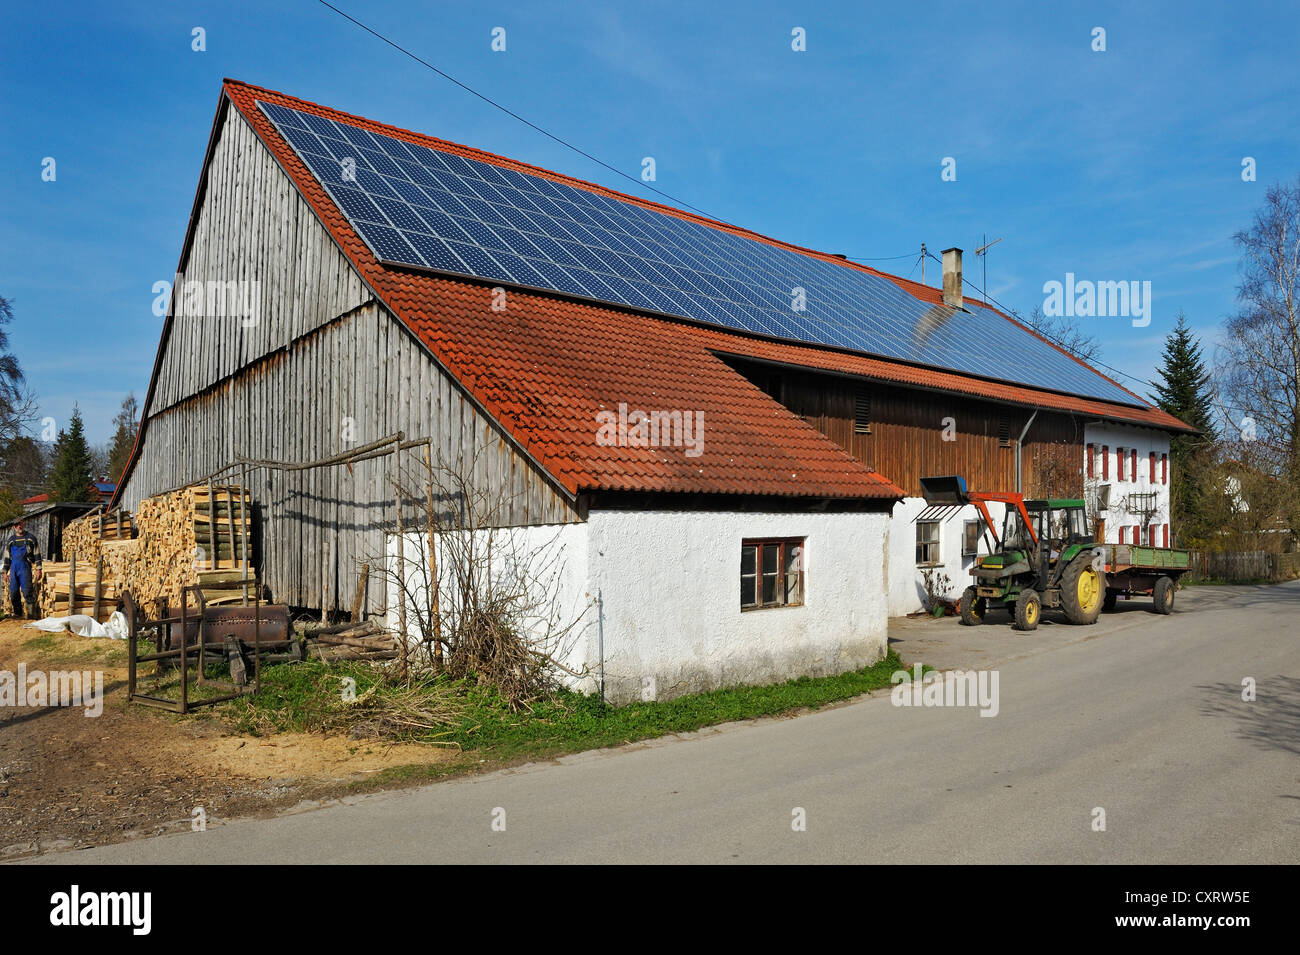 Farm with solar panels on the roof, near Diessen on Lake Ammer, Bavaria, Germany, Europe Stock Photo